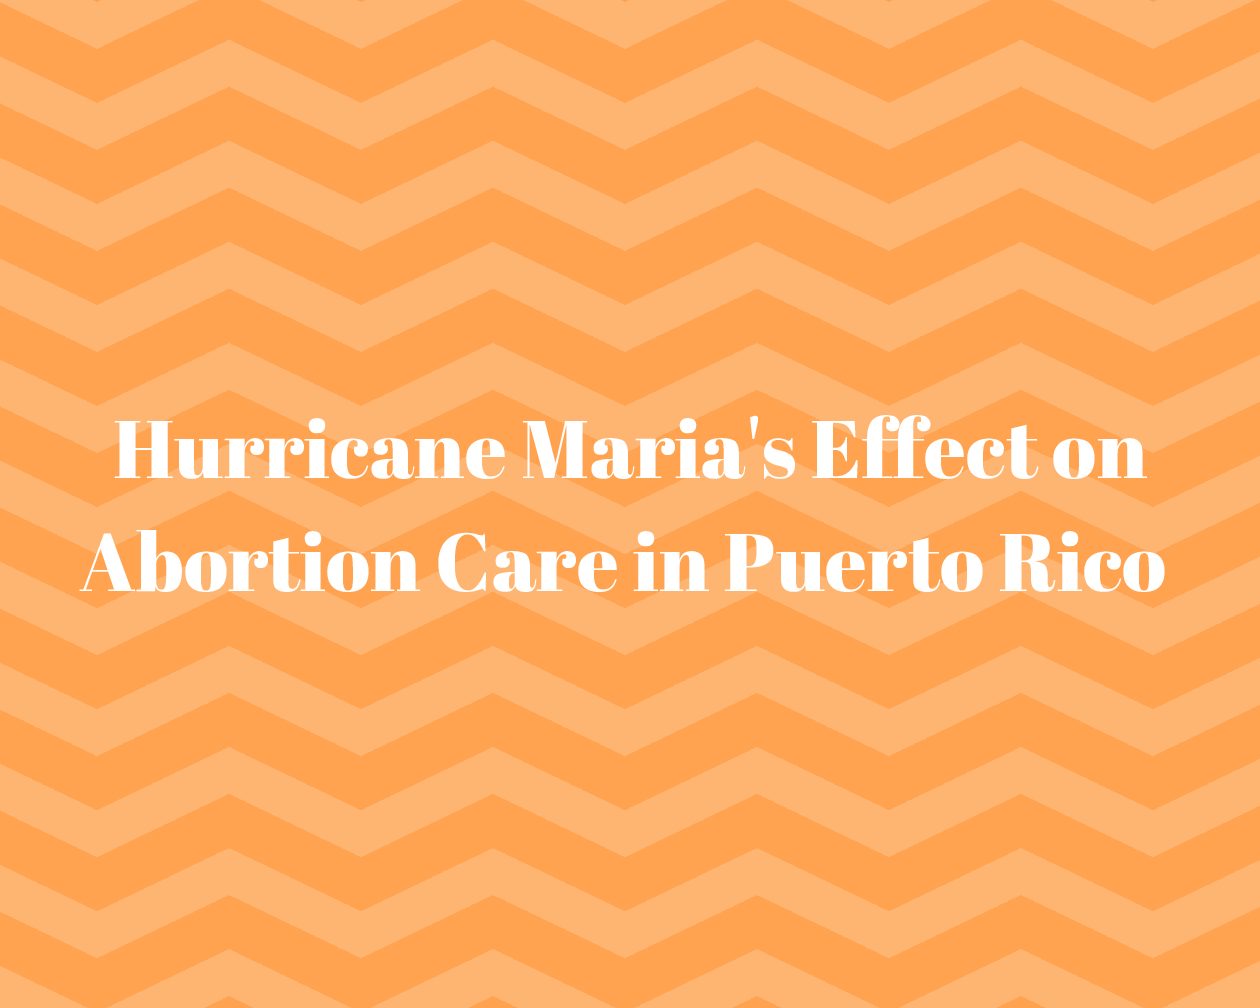 Hurricane Maria’s Effect on Abortion Care in Puerto Rico